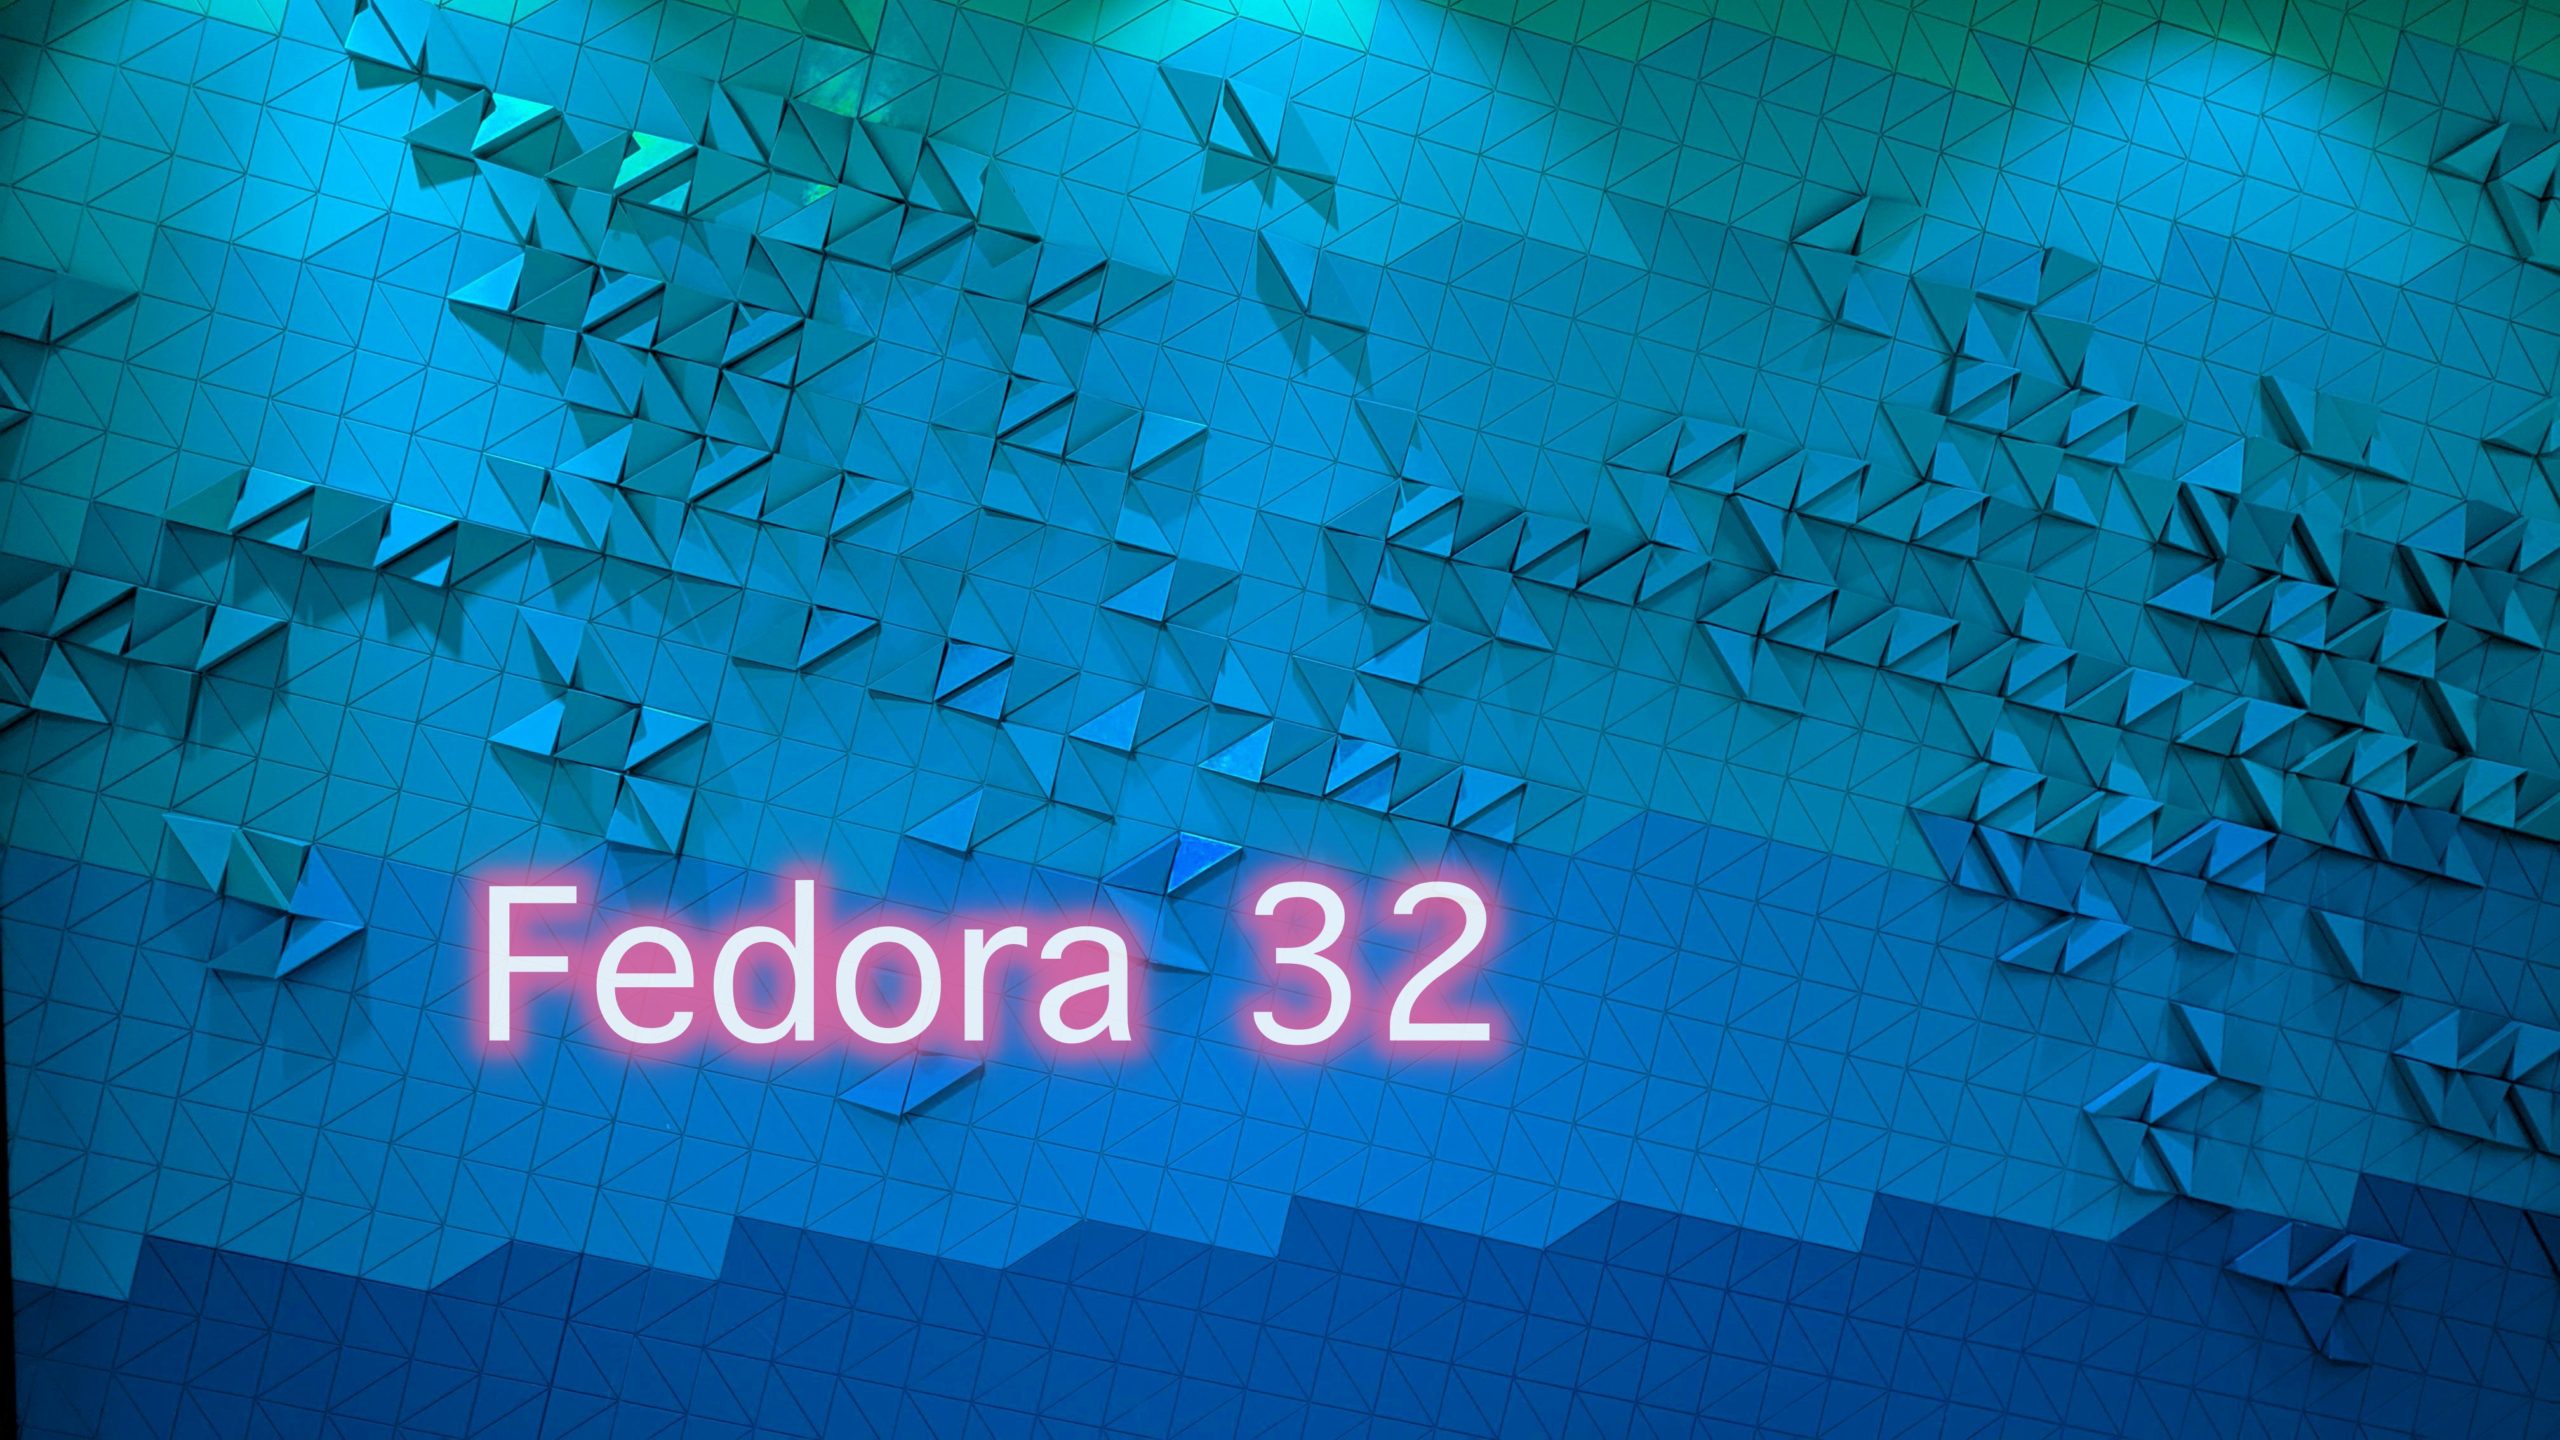 Fedora 32 Officially Released with Linux Kernel 5.6, Available for Download Now